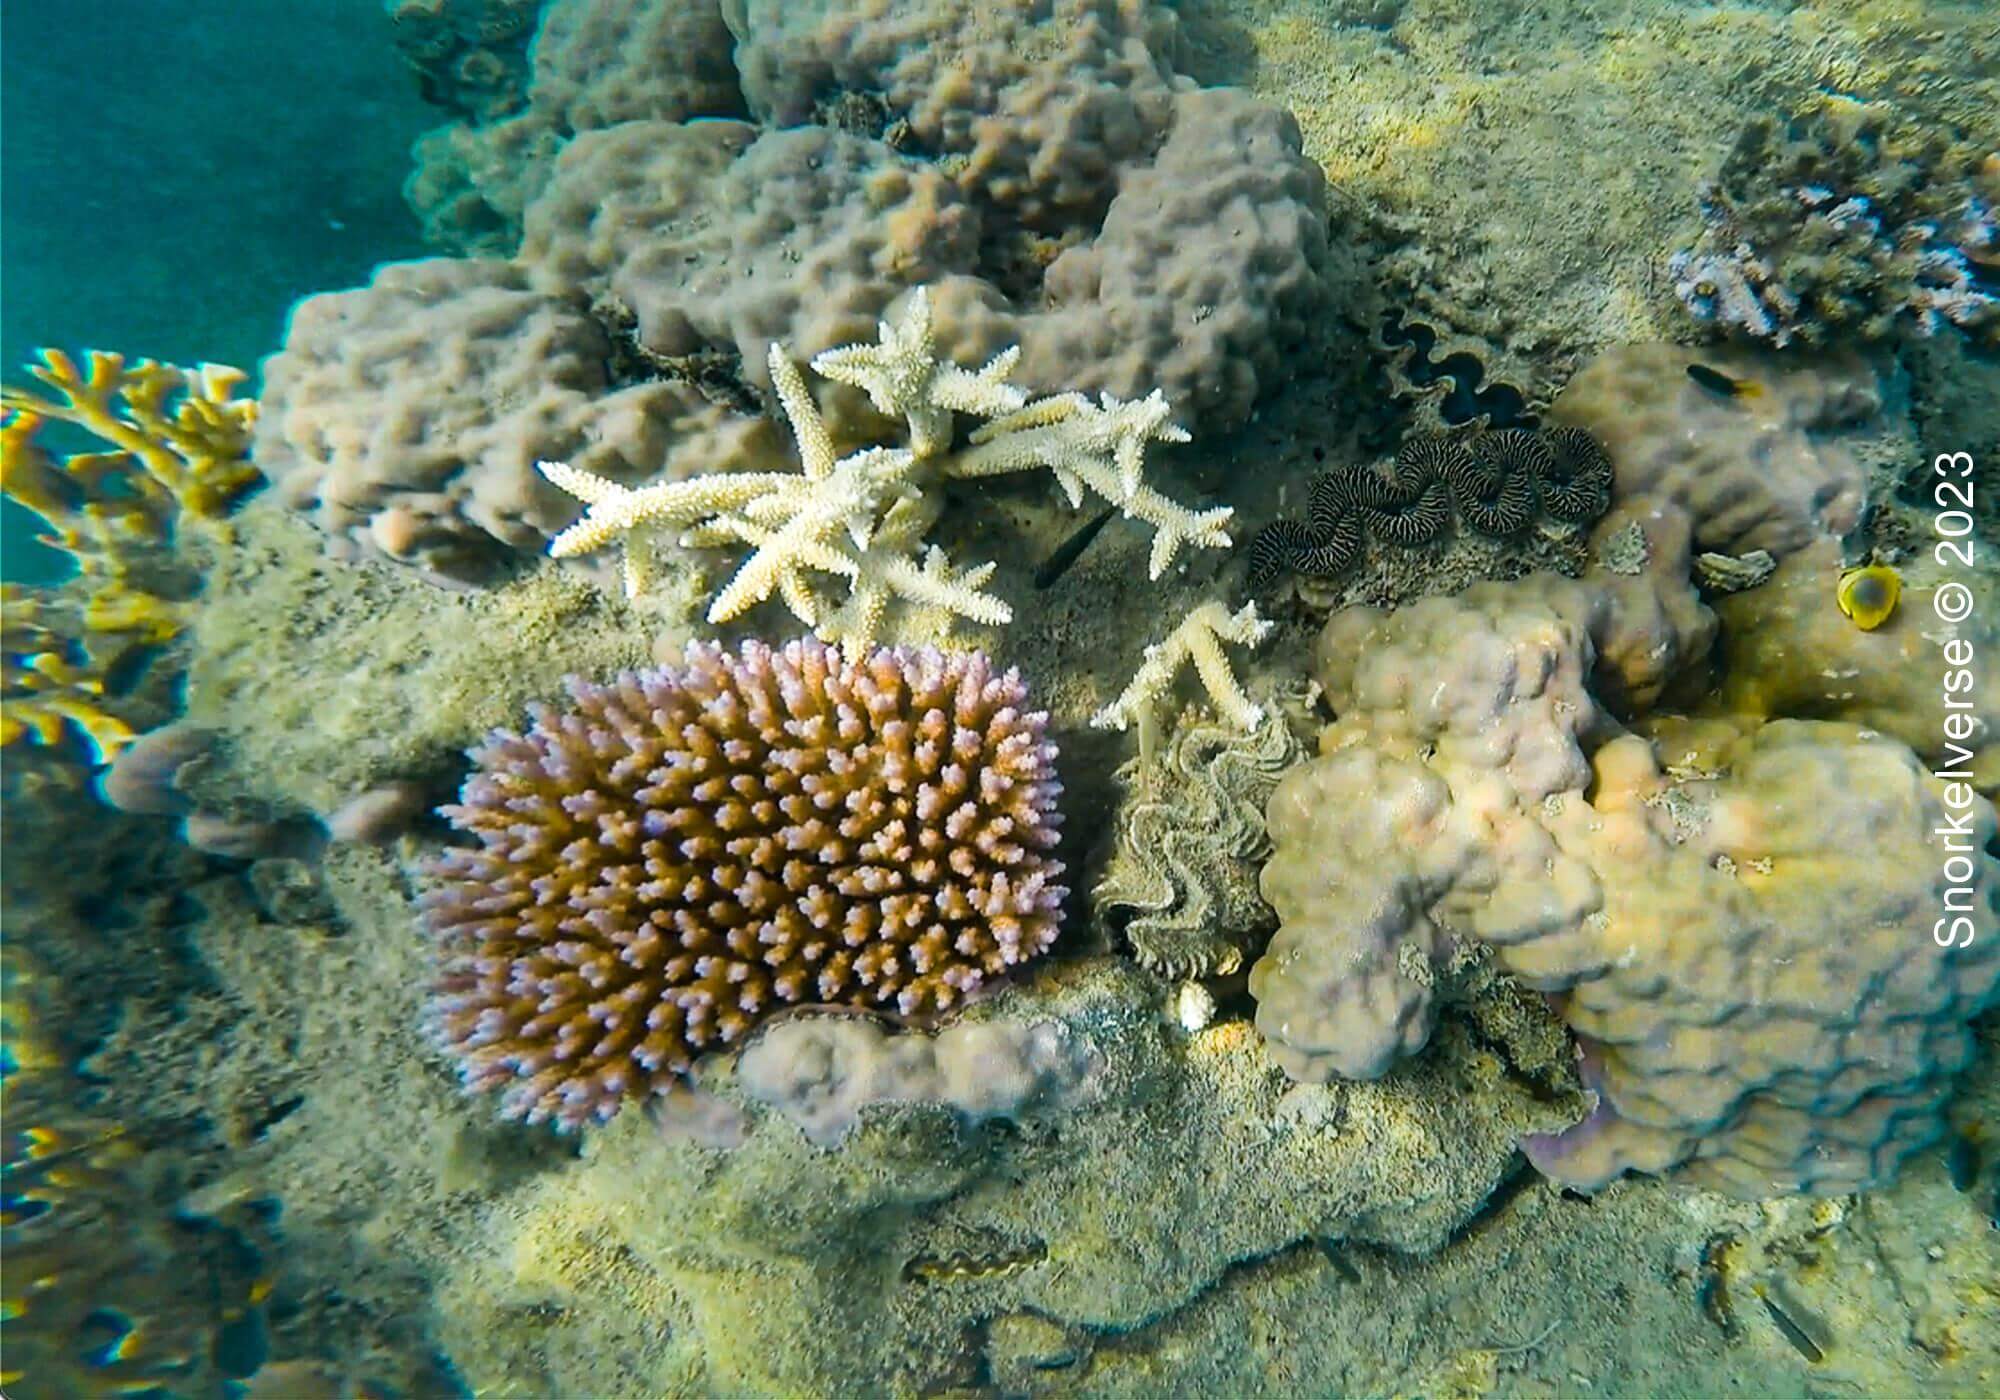 Coral Reef Whitsunday Islands